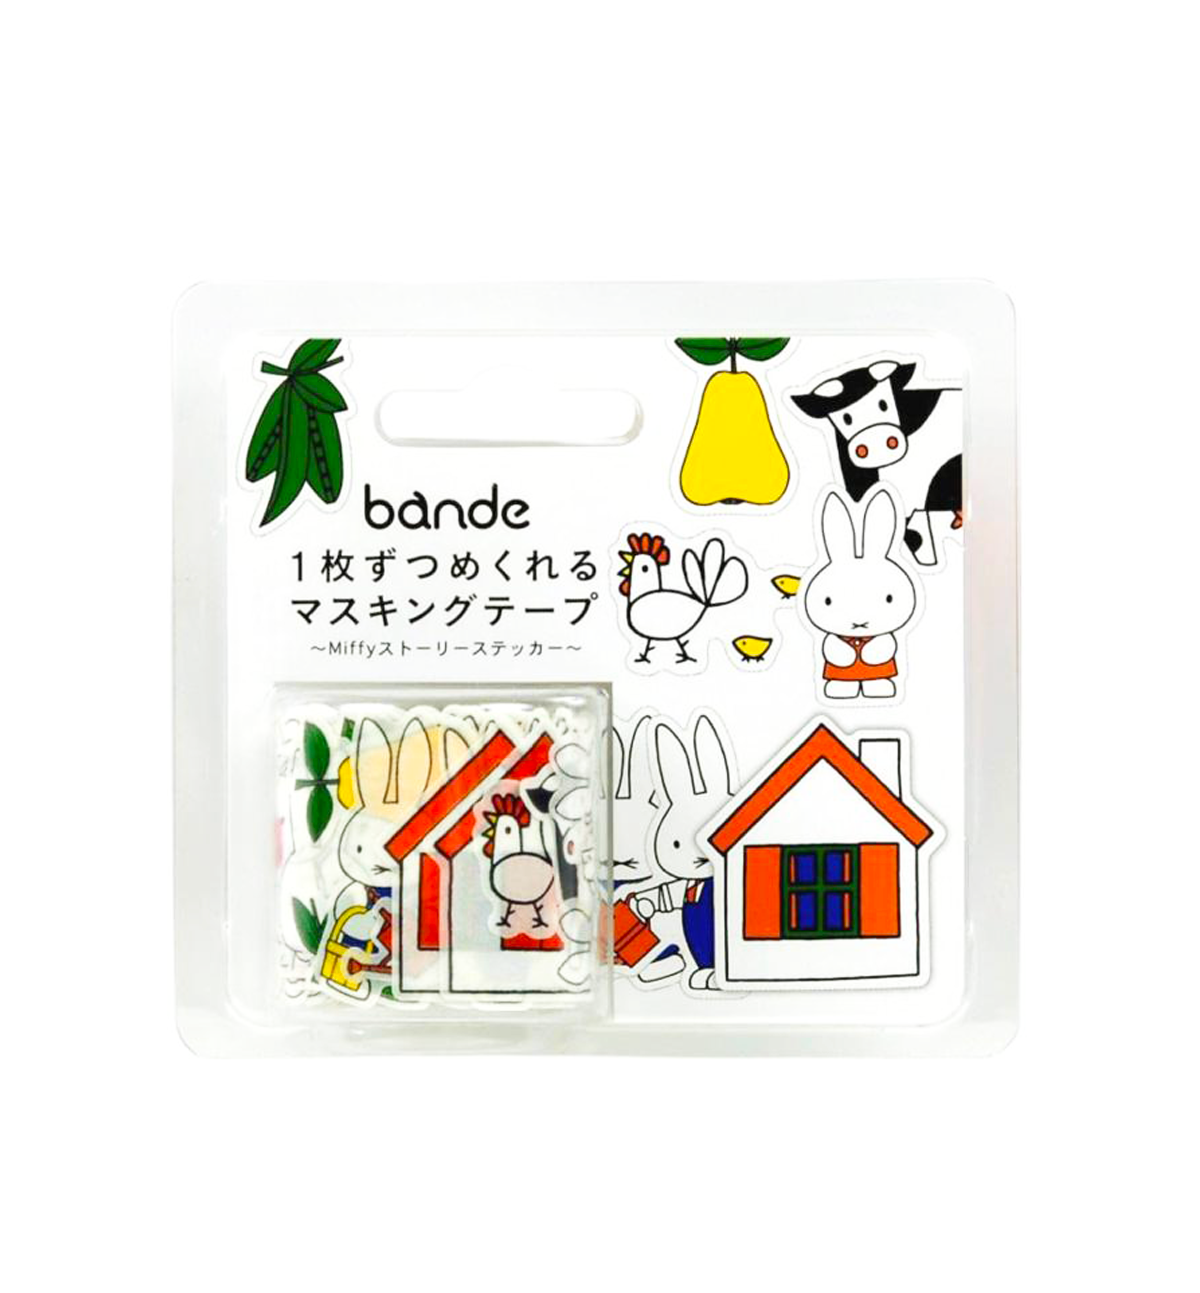 Miffy & Bande Roll Sticker [Miffy's House]